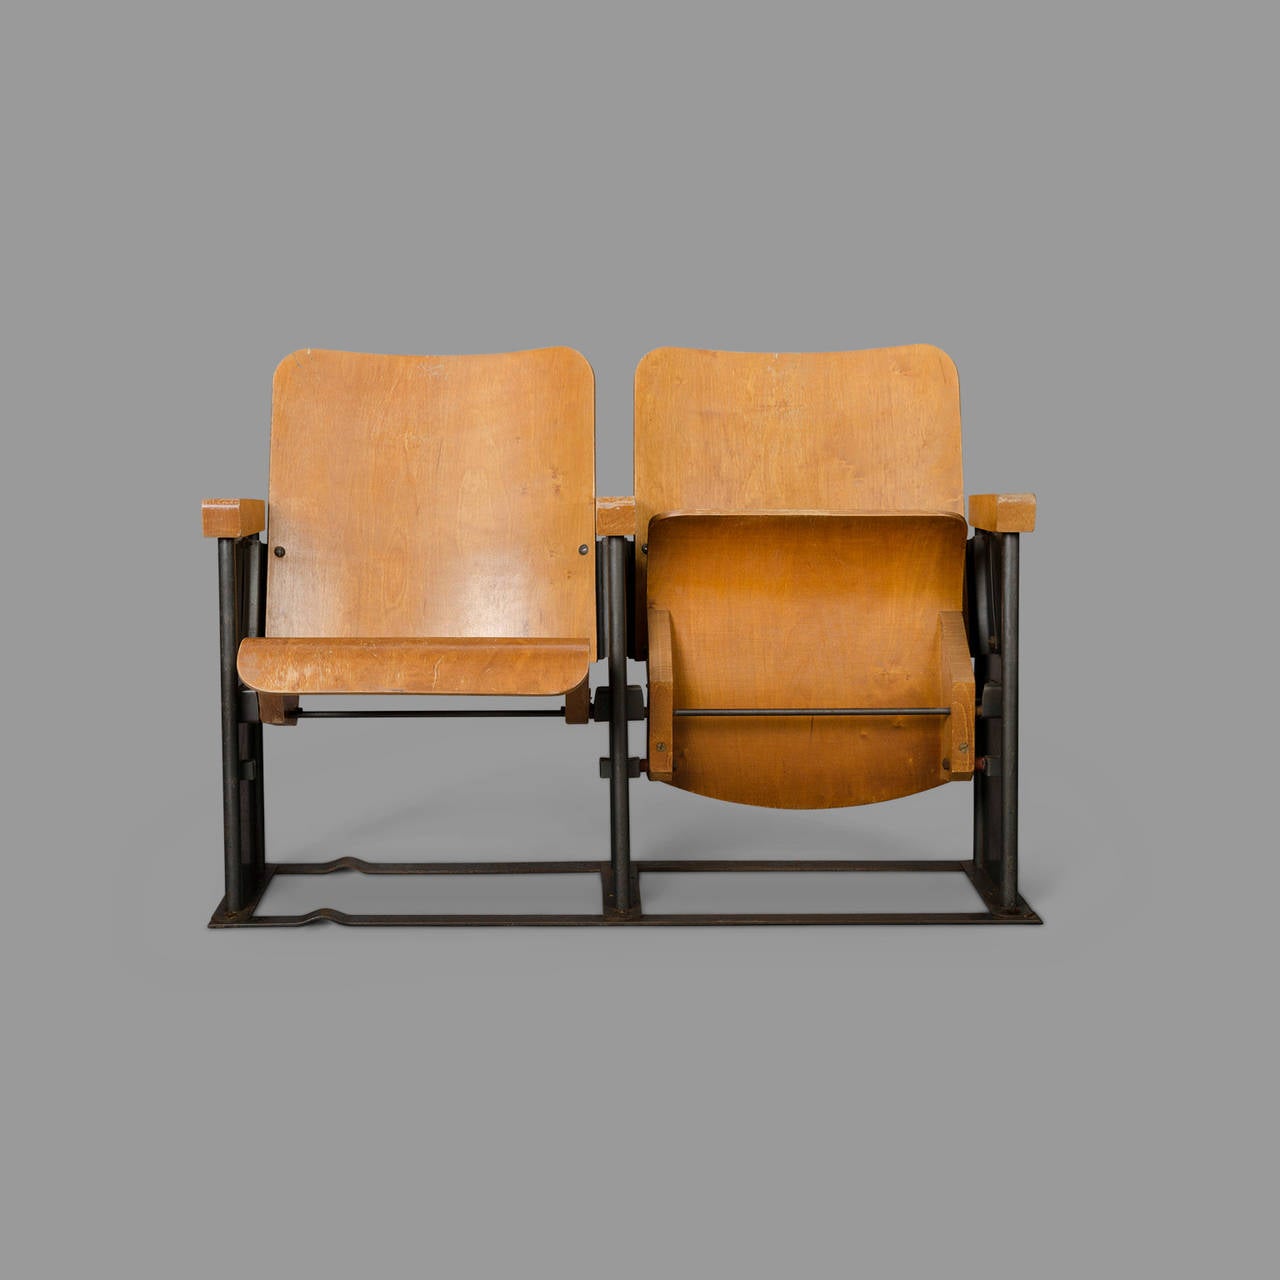 French 1950s Movie Theater Armchairs, From a Military Base